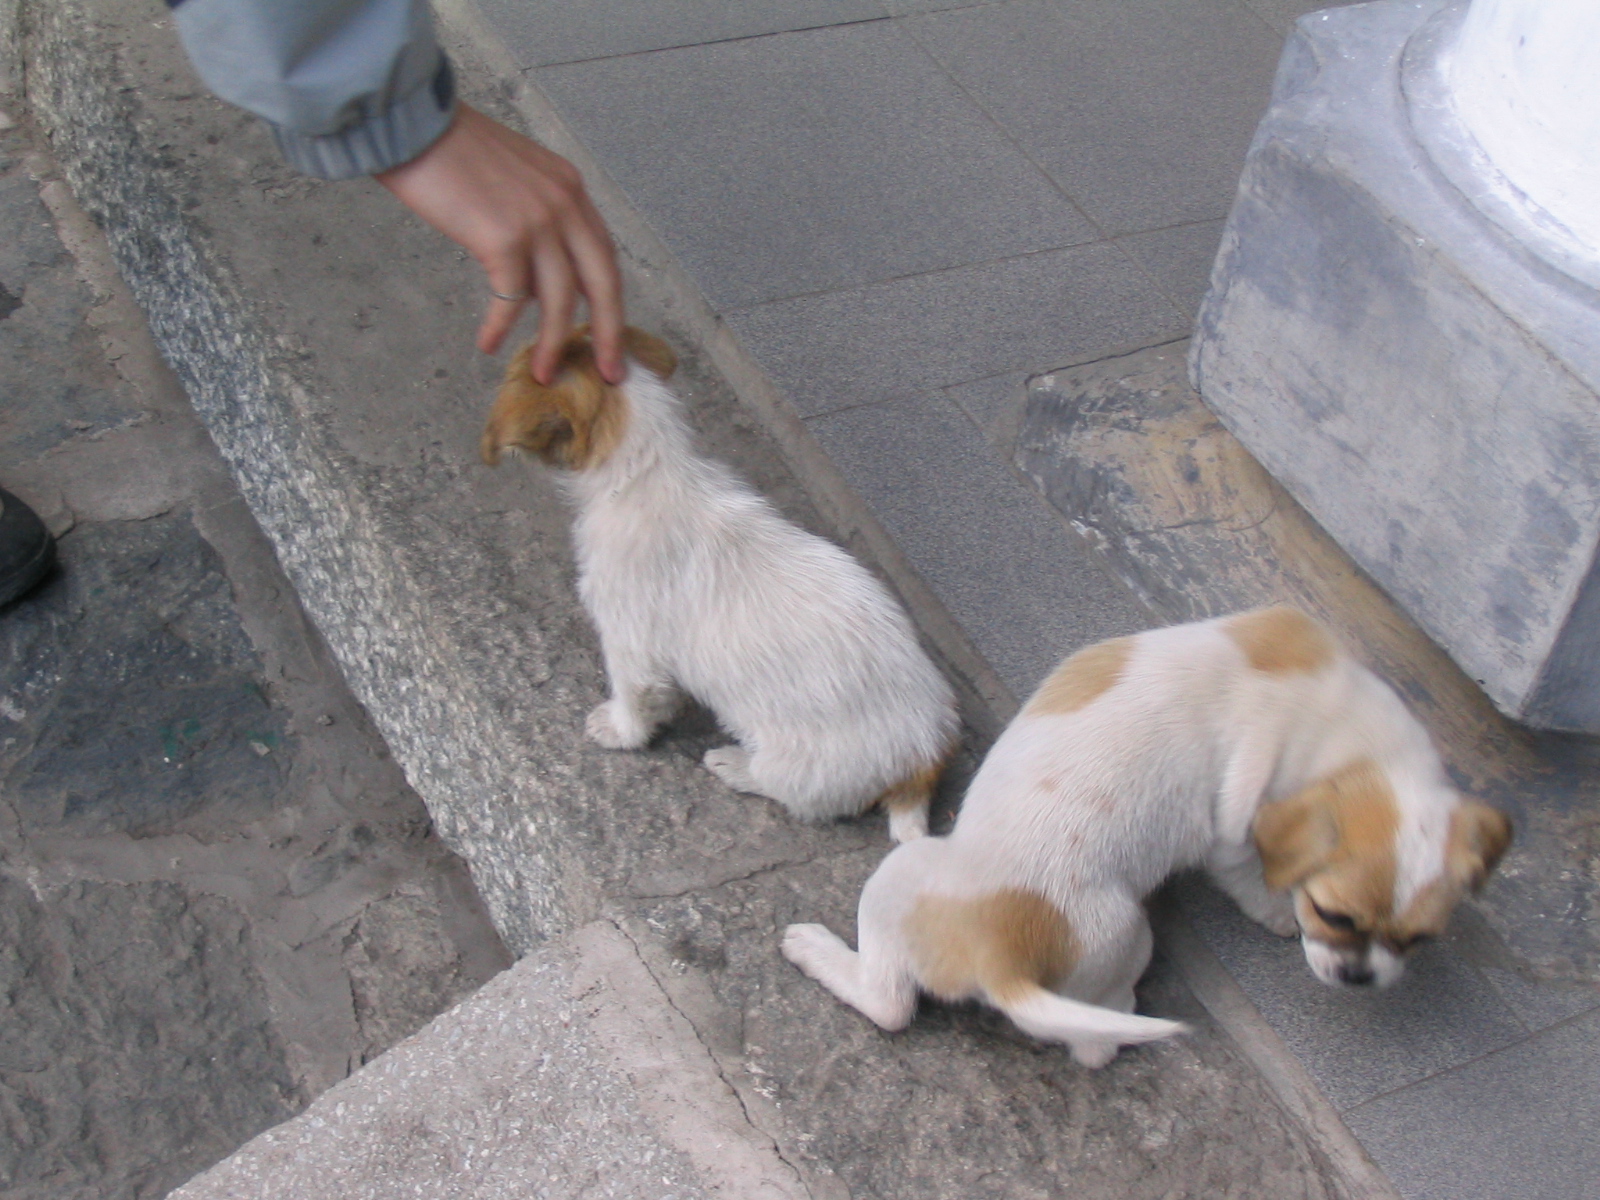 a person petting two puppies on a concrete surface